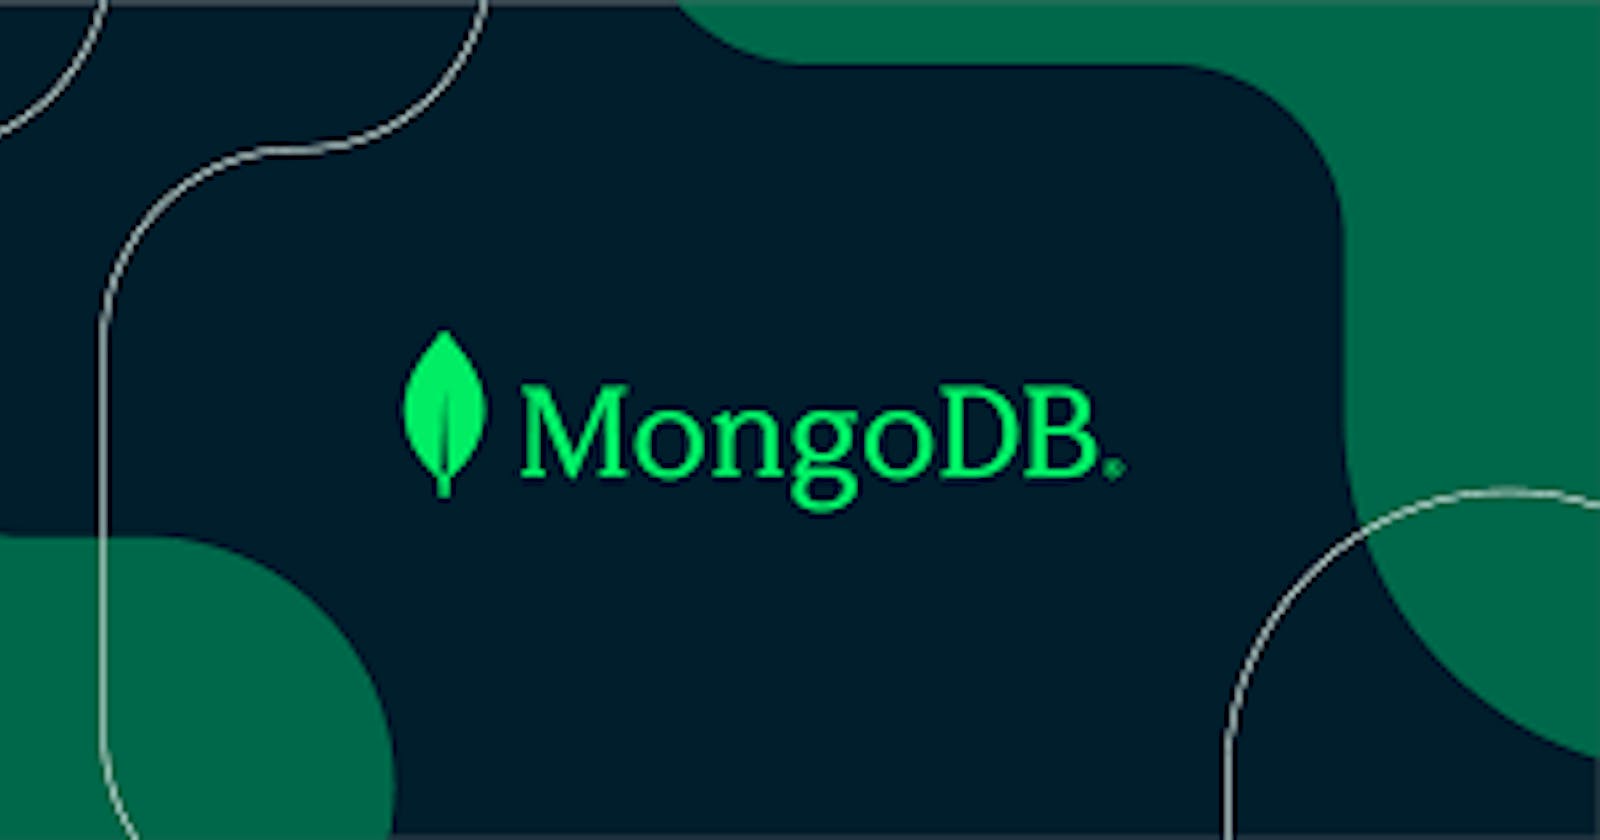 How To Fix Exitcode:100 In Mongod Service: Mongodb